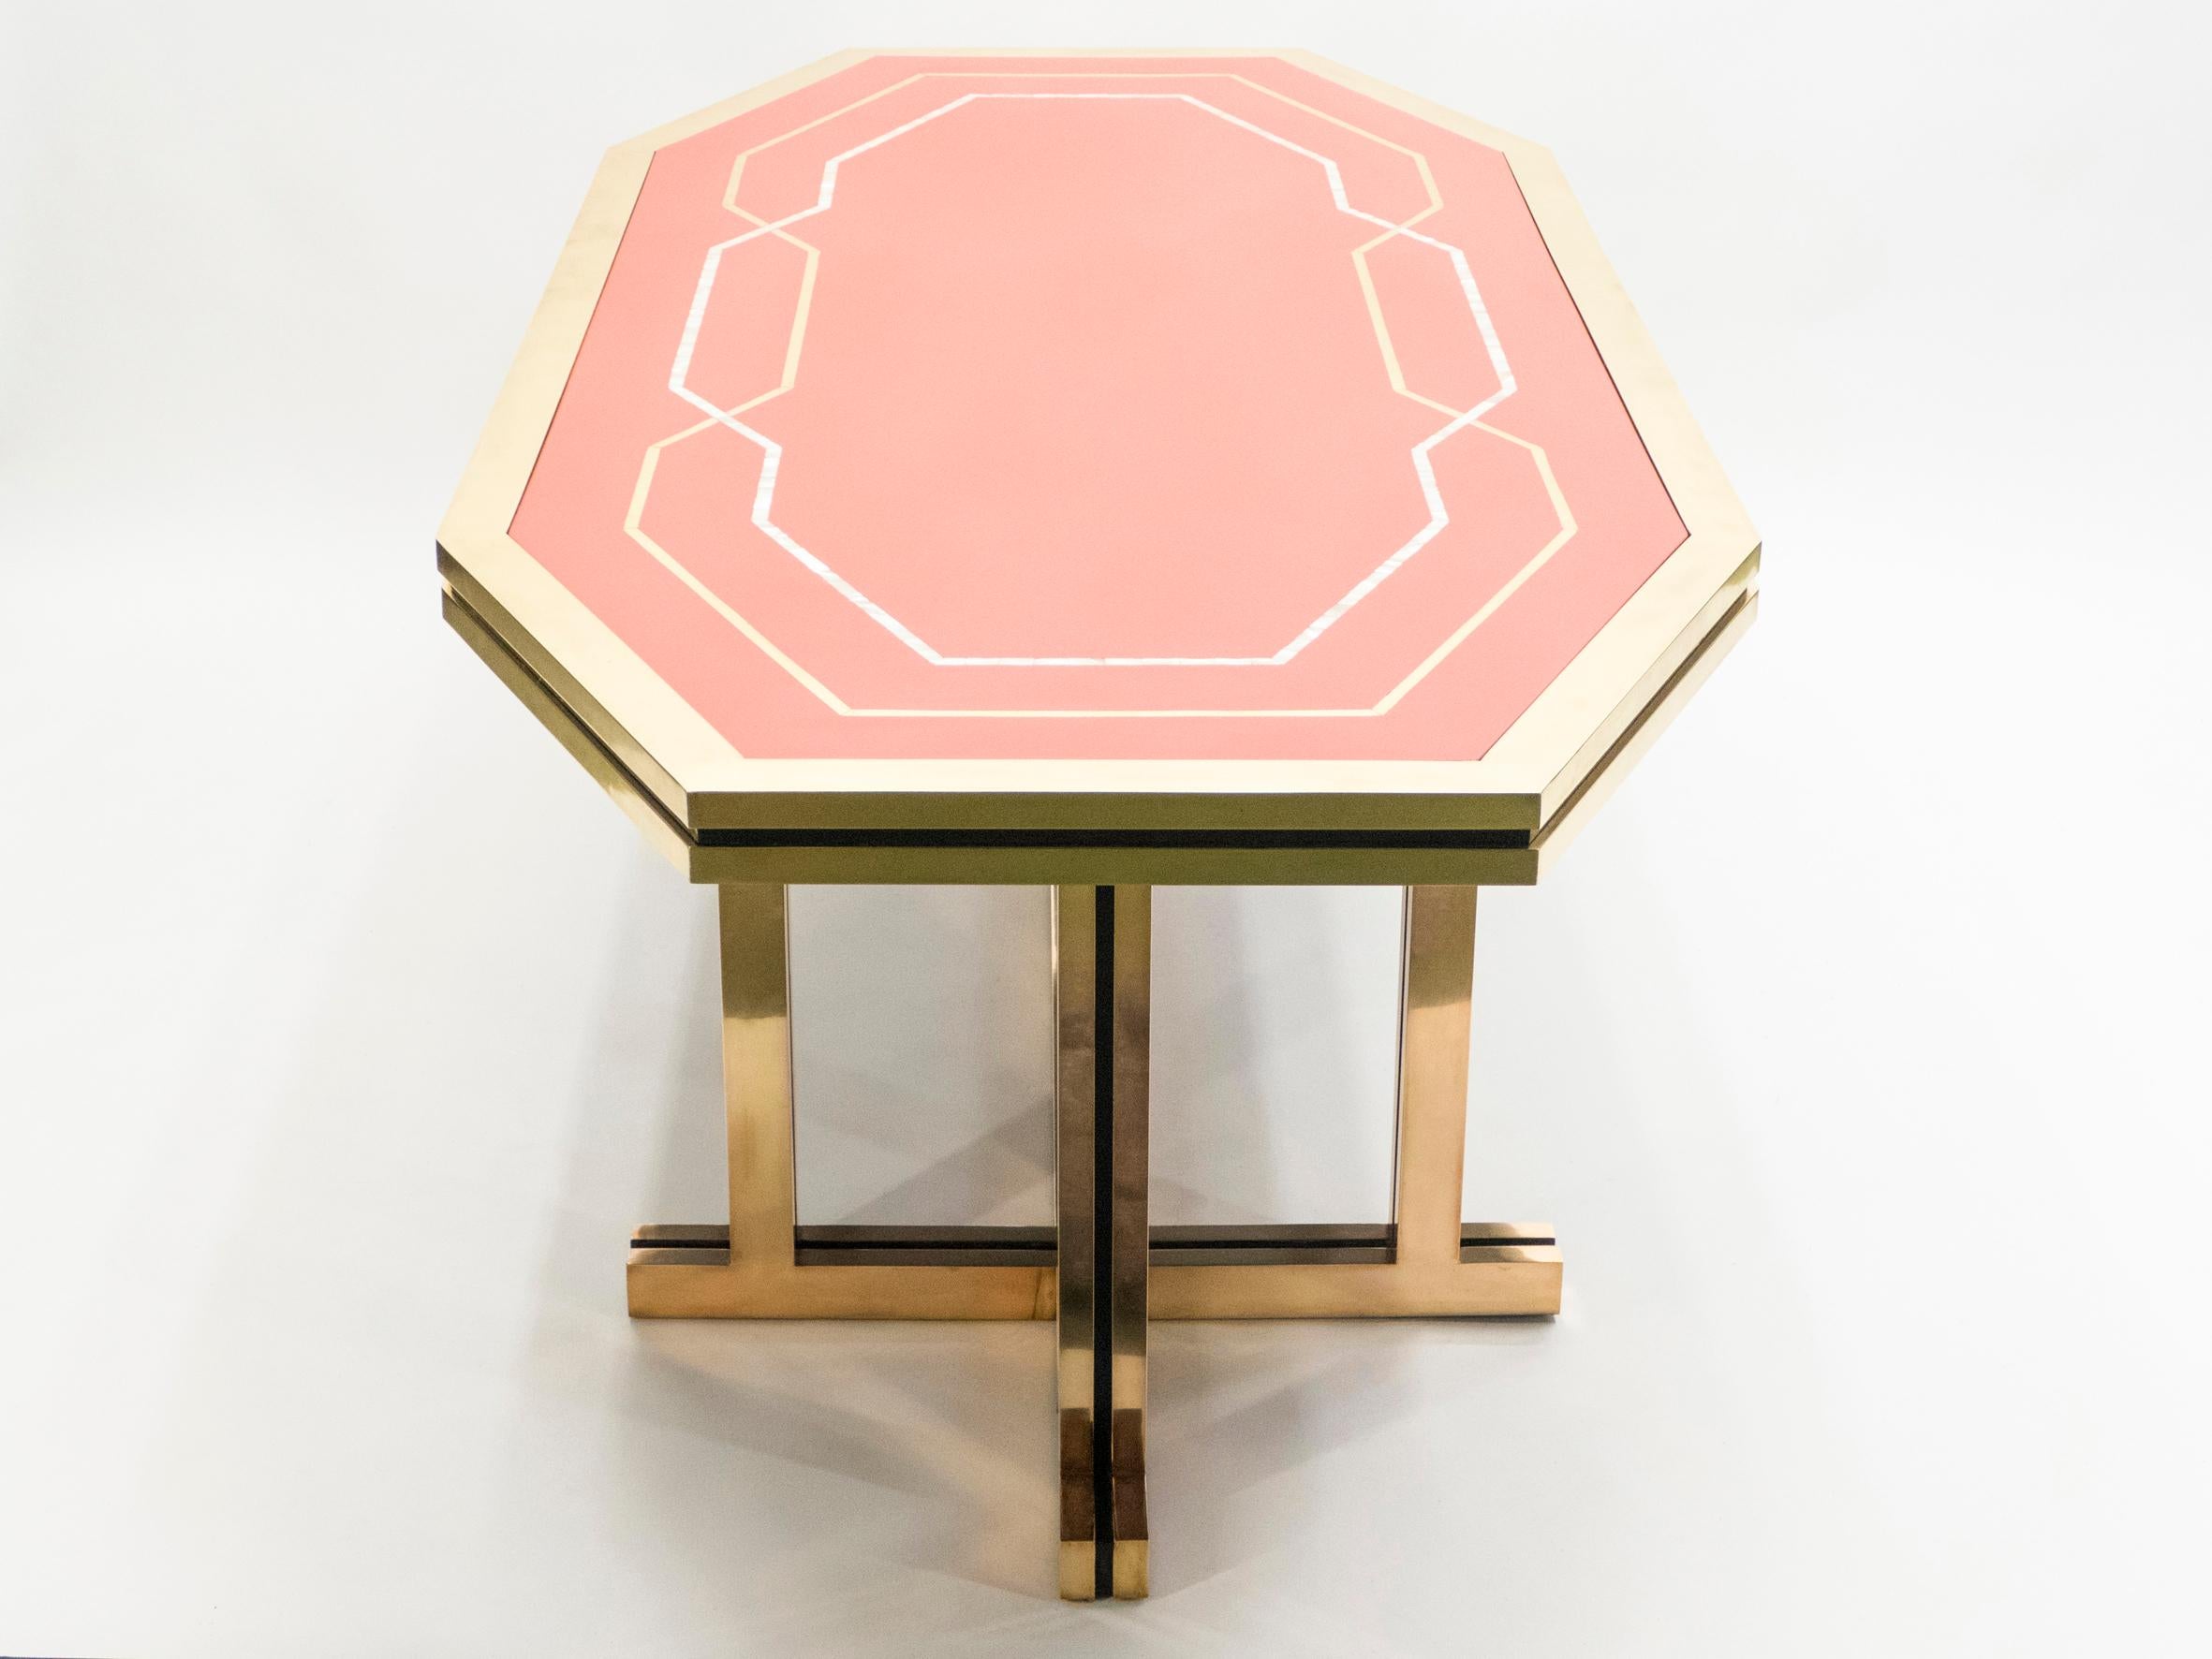 Unique Red Lacquer and Brass Maison Jansen Dining Table or Desk, 1970s For Sale 2